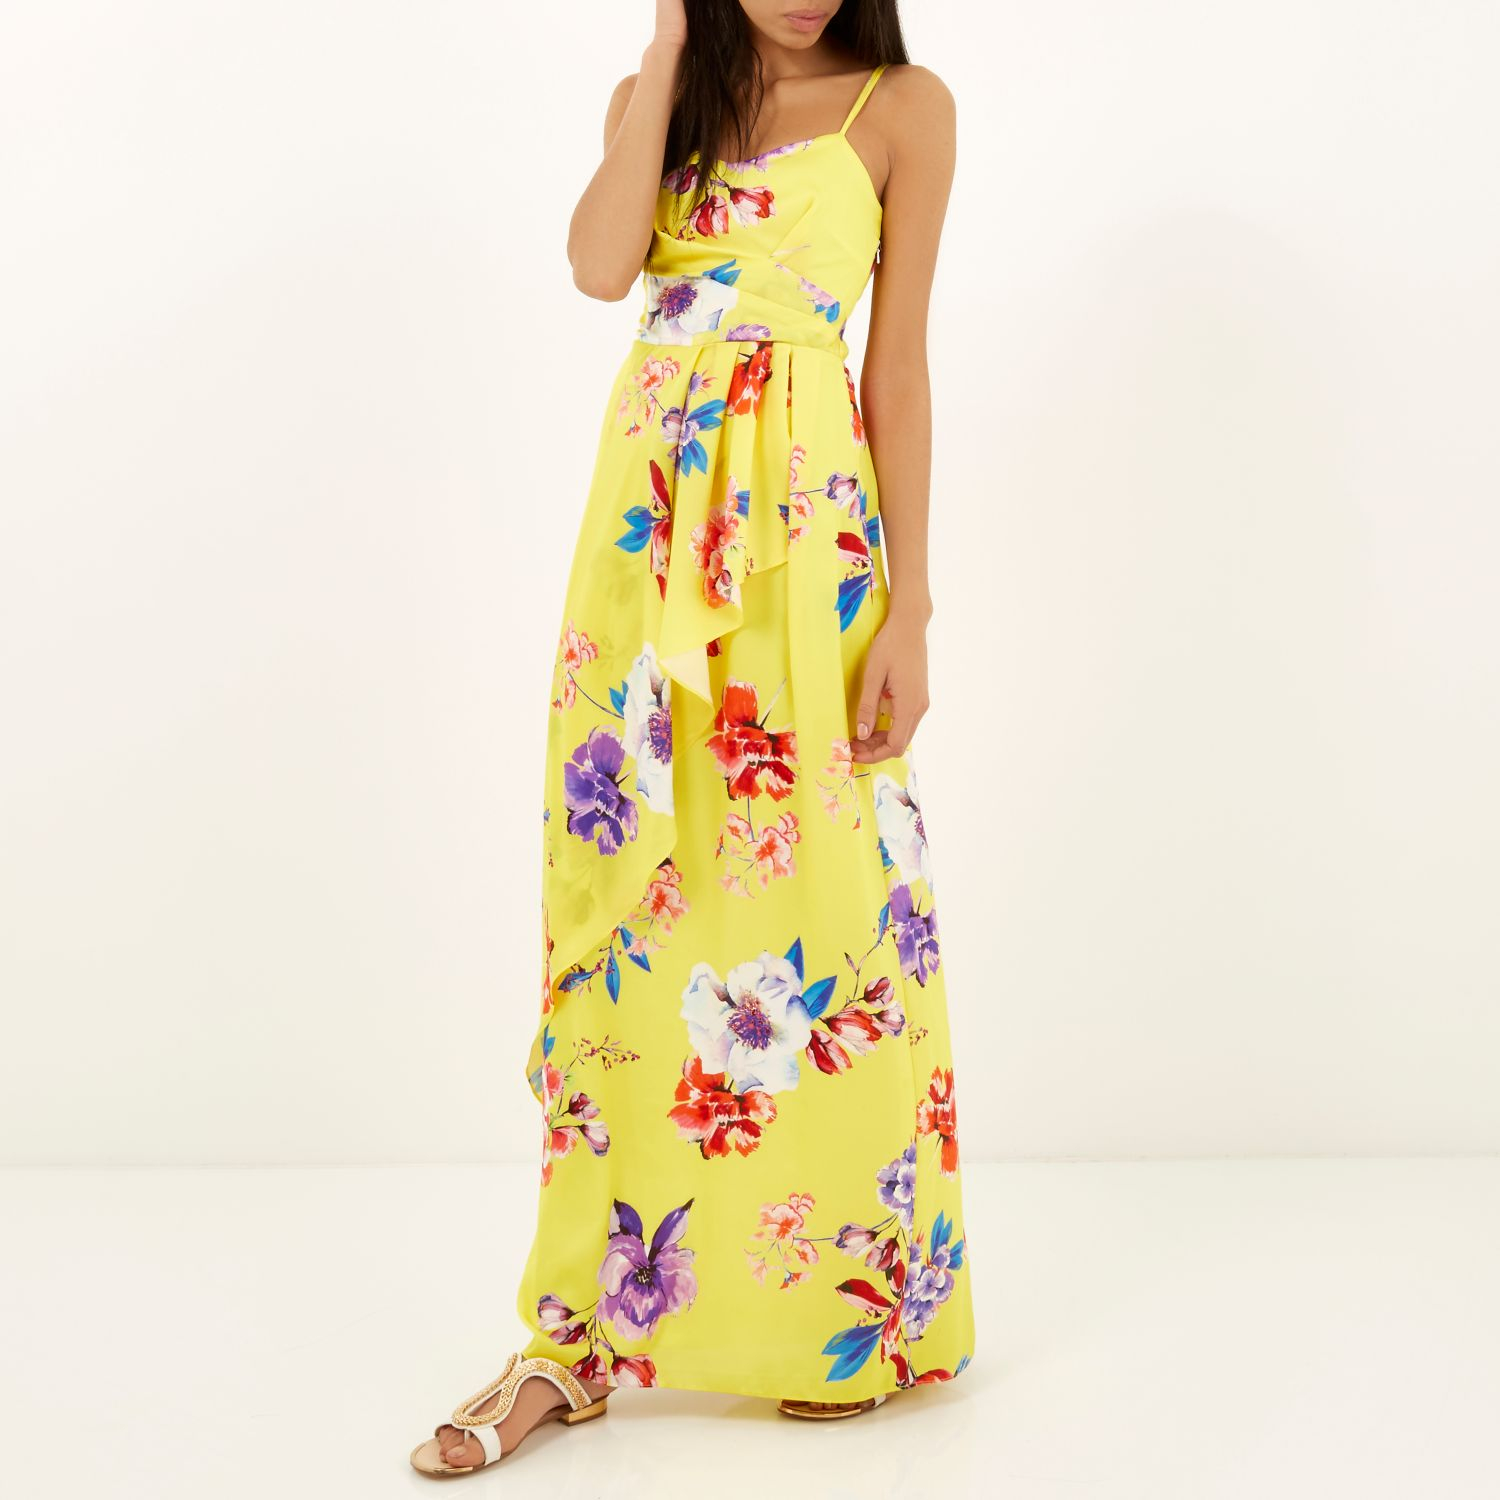 river island yellow yellow floral print maxi dress product 3 036232814 normal